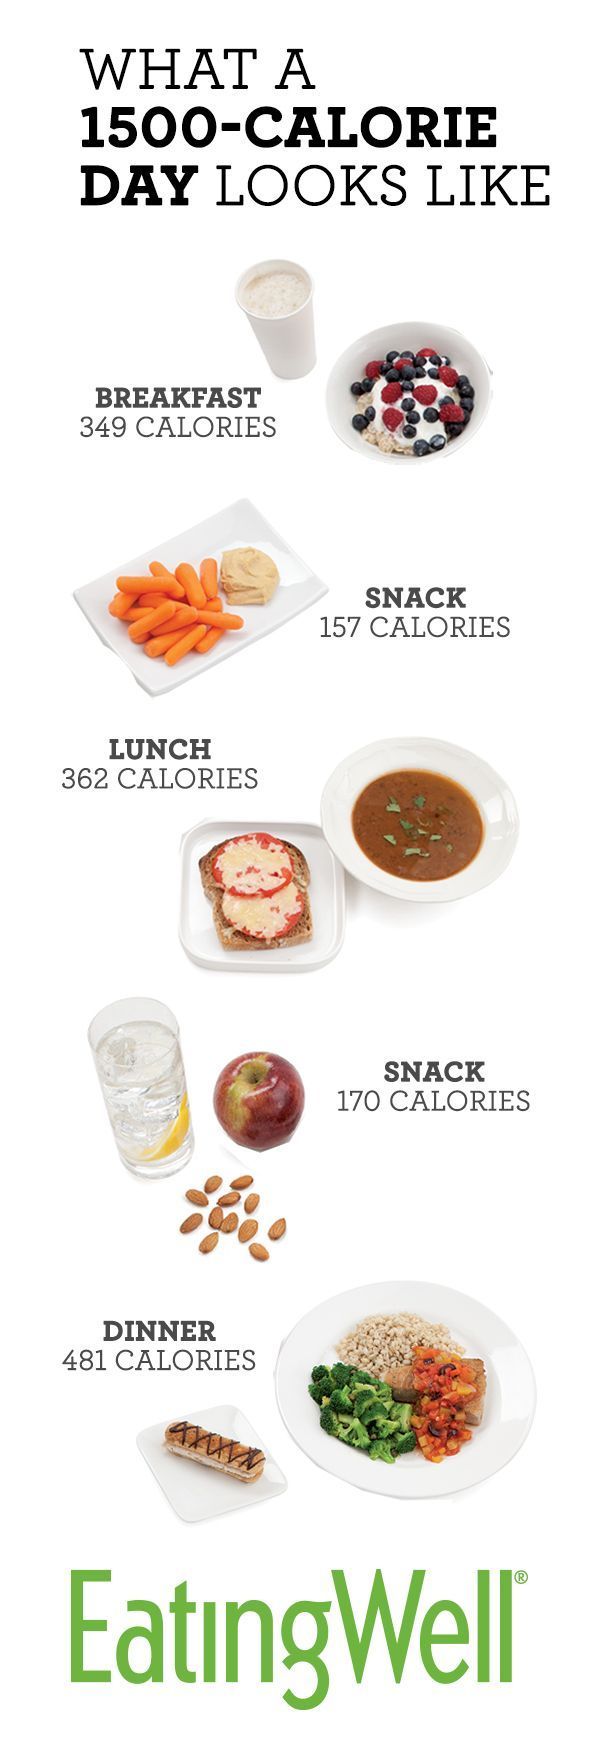 14 Snack Rituals That Will Transform Your Body & Change Your Life